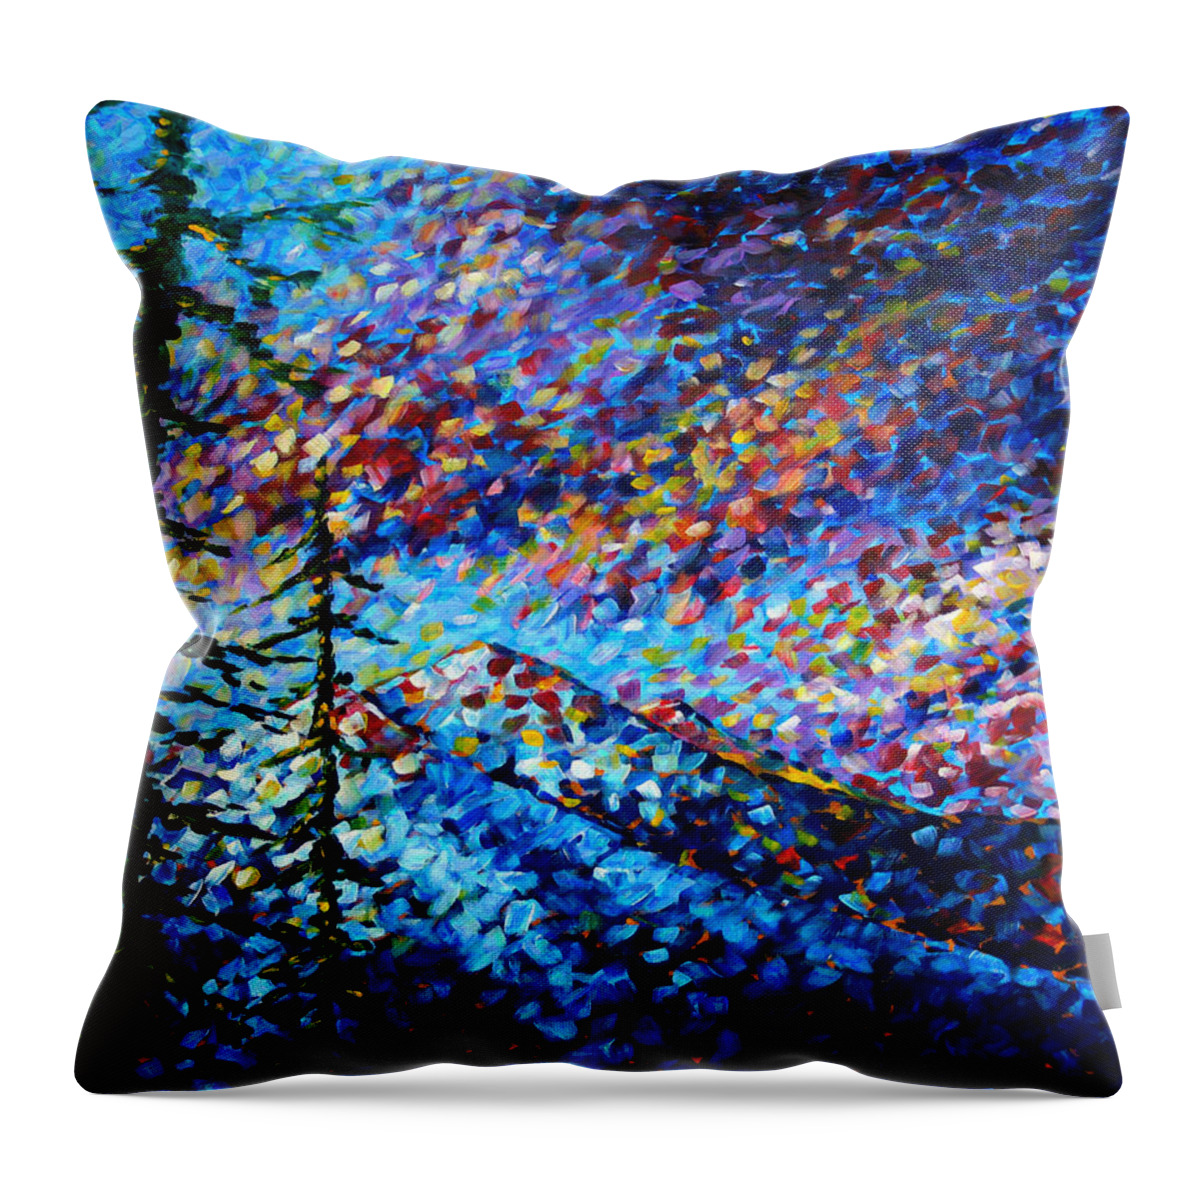 Abstract Throw Pillow featuring the painting Original Abstract Impressionist Landscape Contemporary Art by MADART Mountain Glory by Megan Duncanson